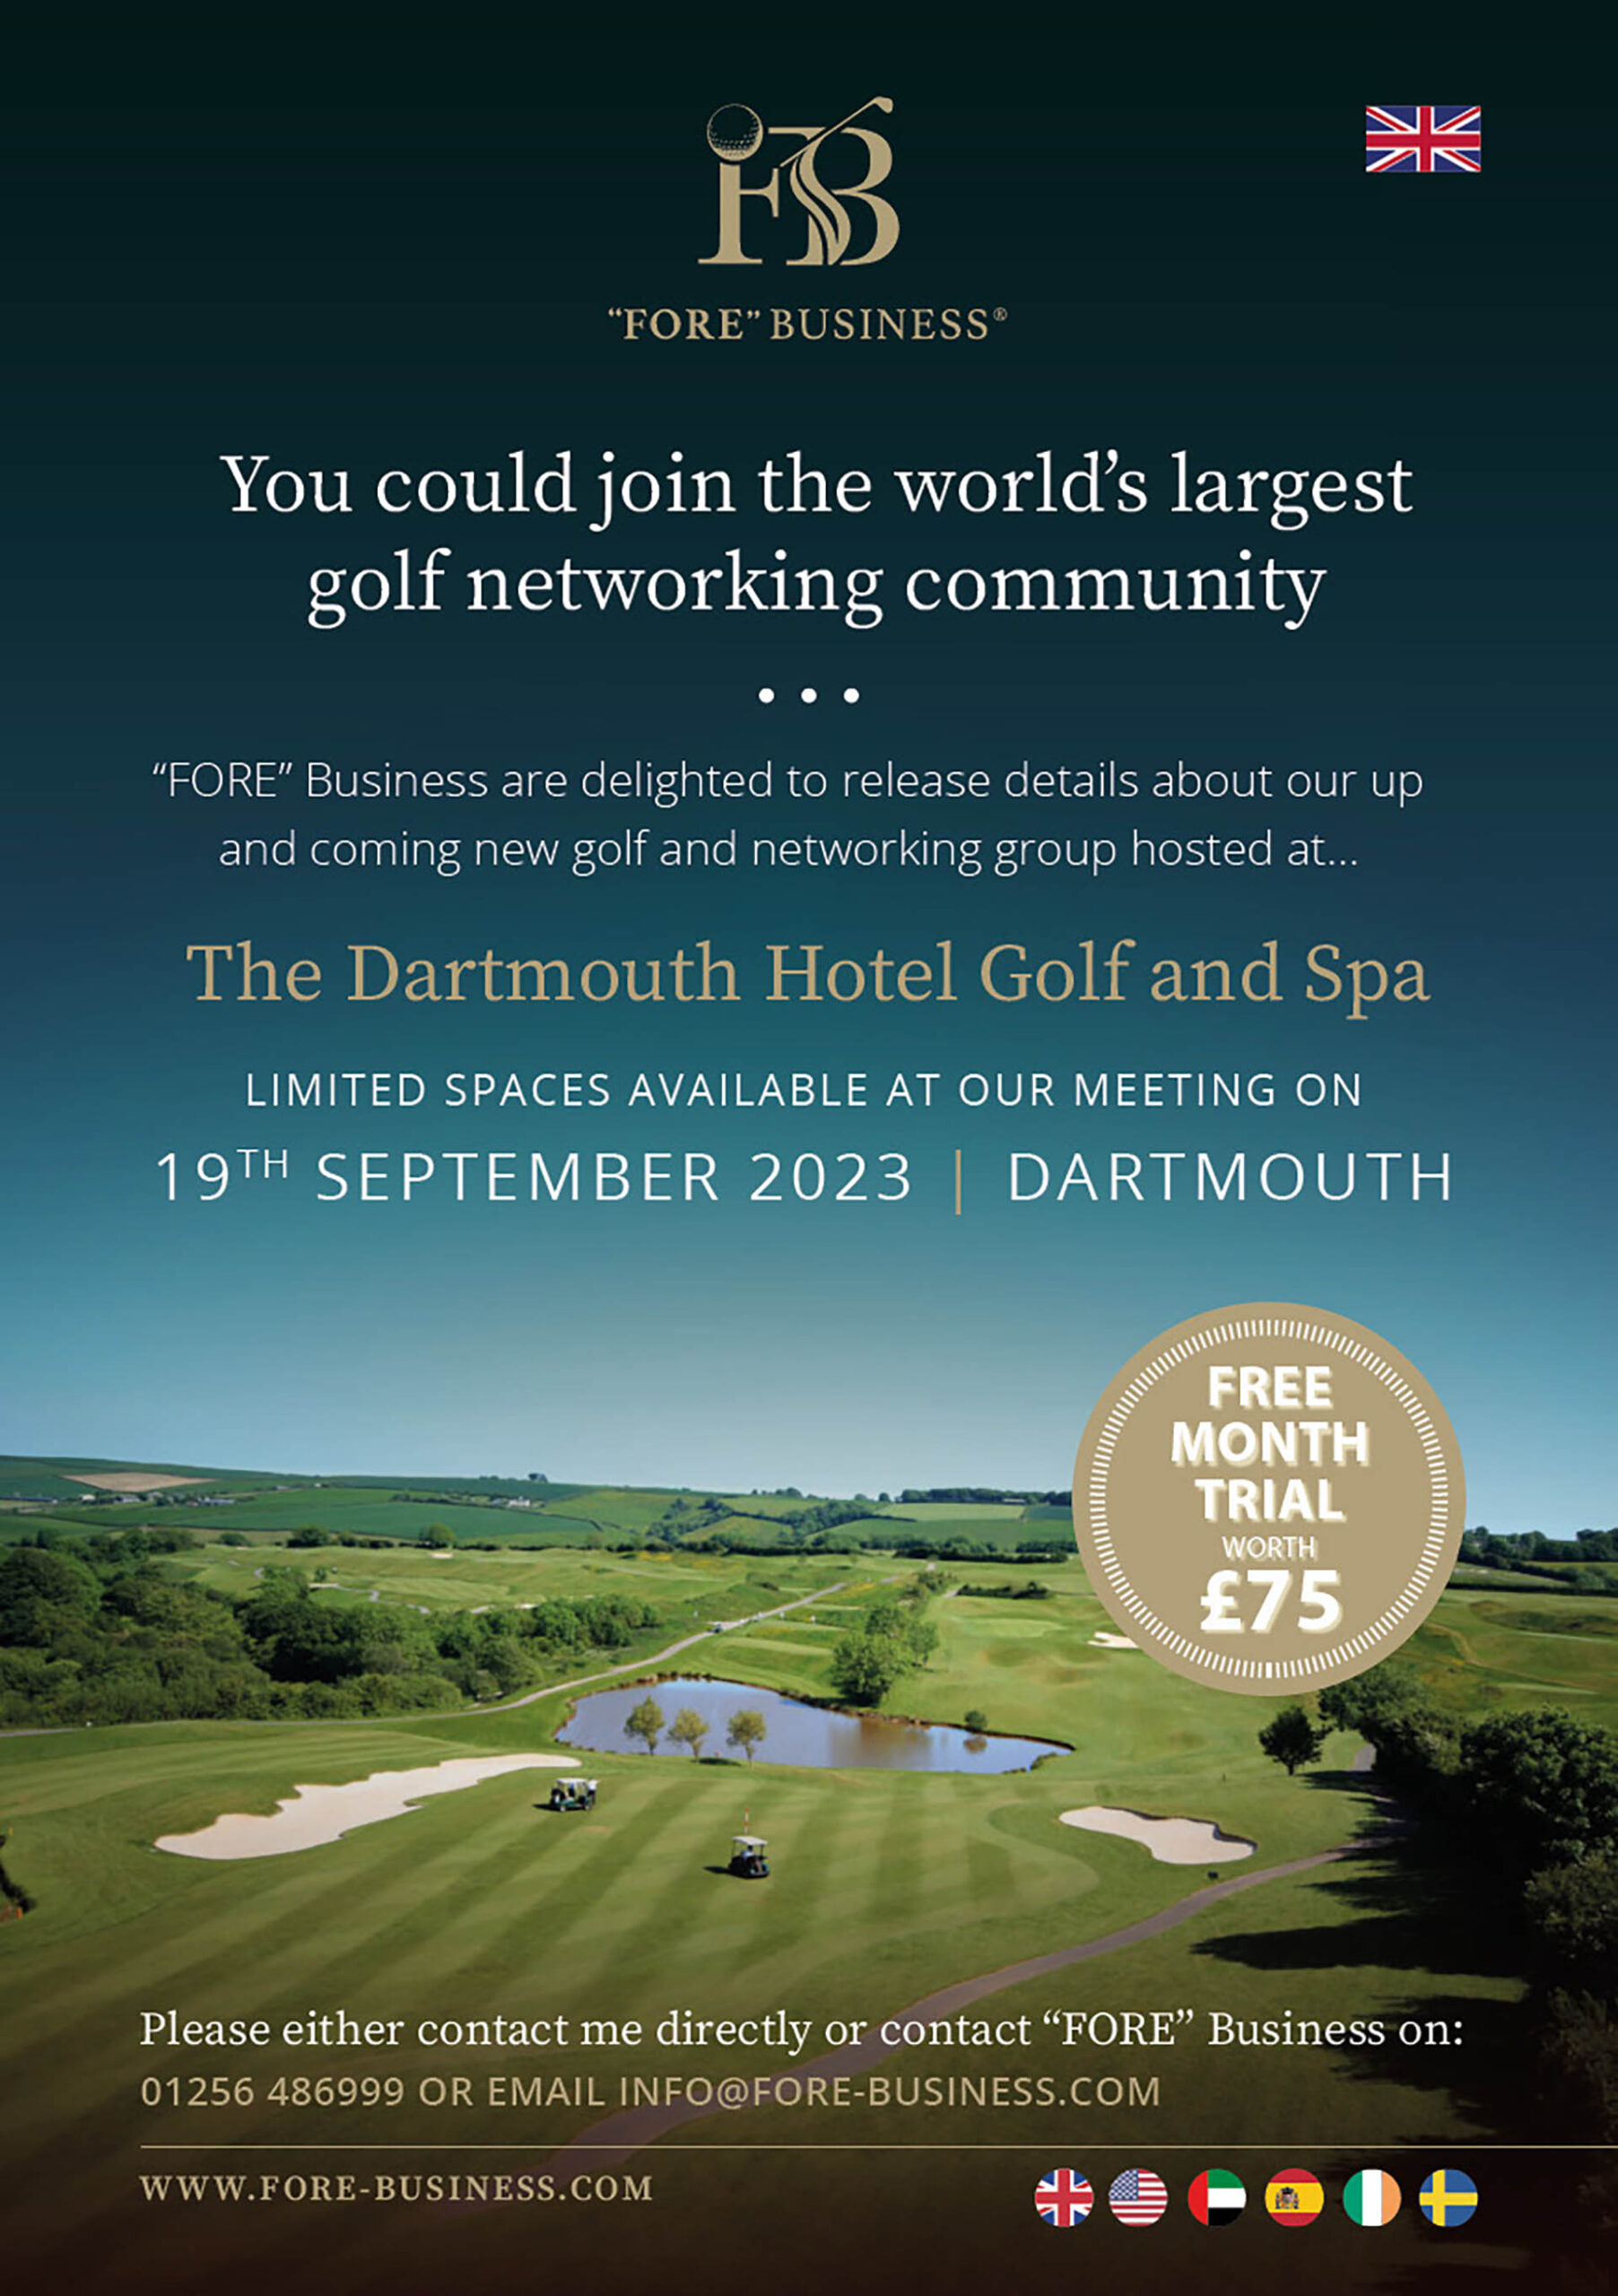 Fore Business - Golf Networking events at the Dartmouth Hotel Golf and Spa